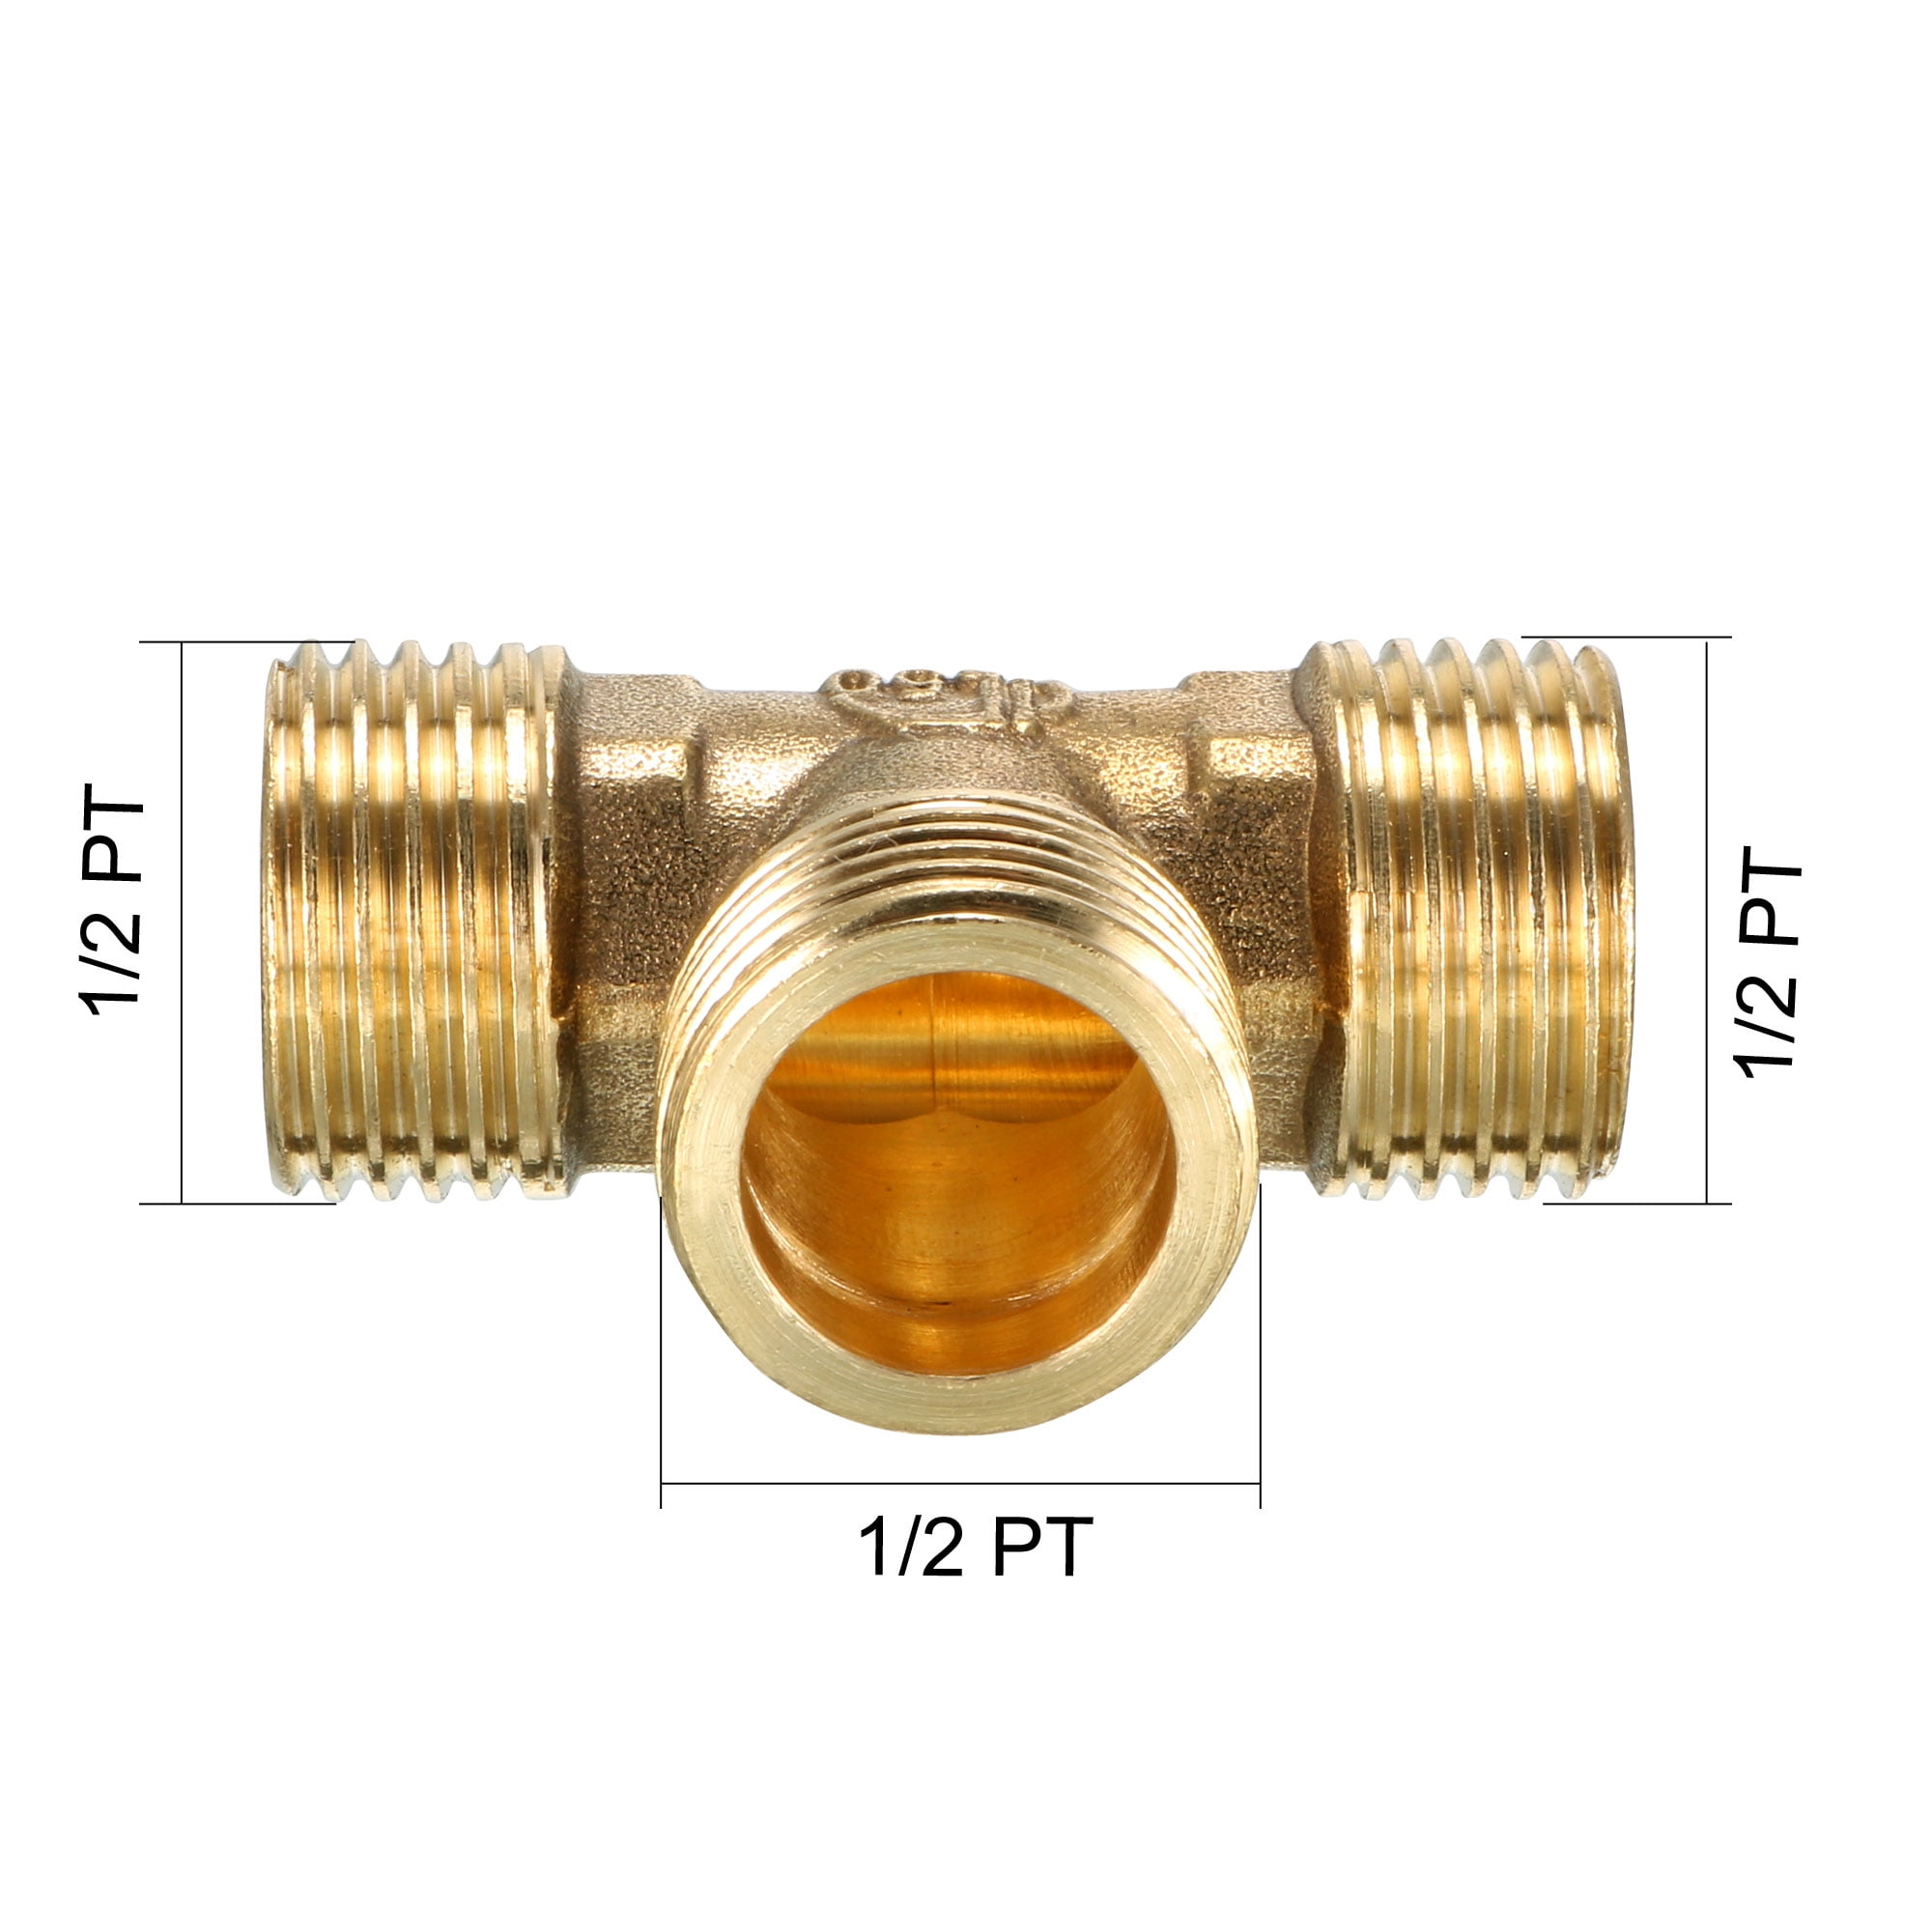 2PCS Brass 3 WAY EQUAL TEE MALE THREAD PT 1/4" PIPE CONNECTOR High Quality 